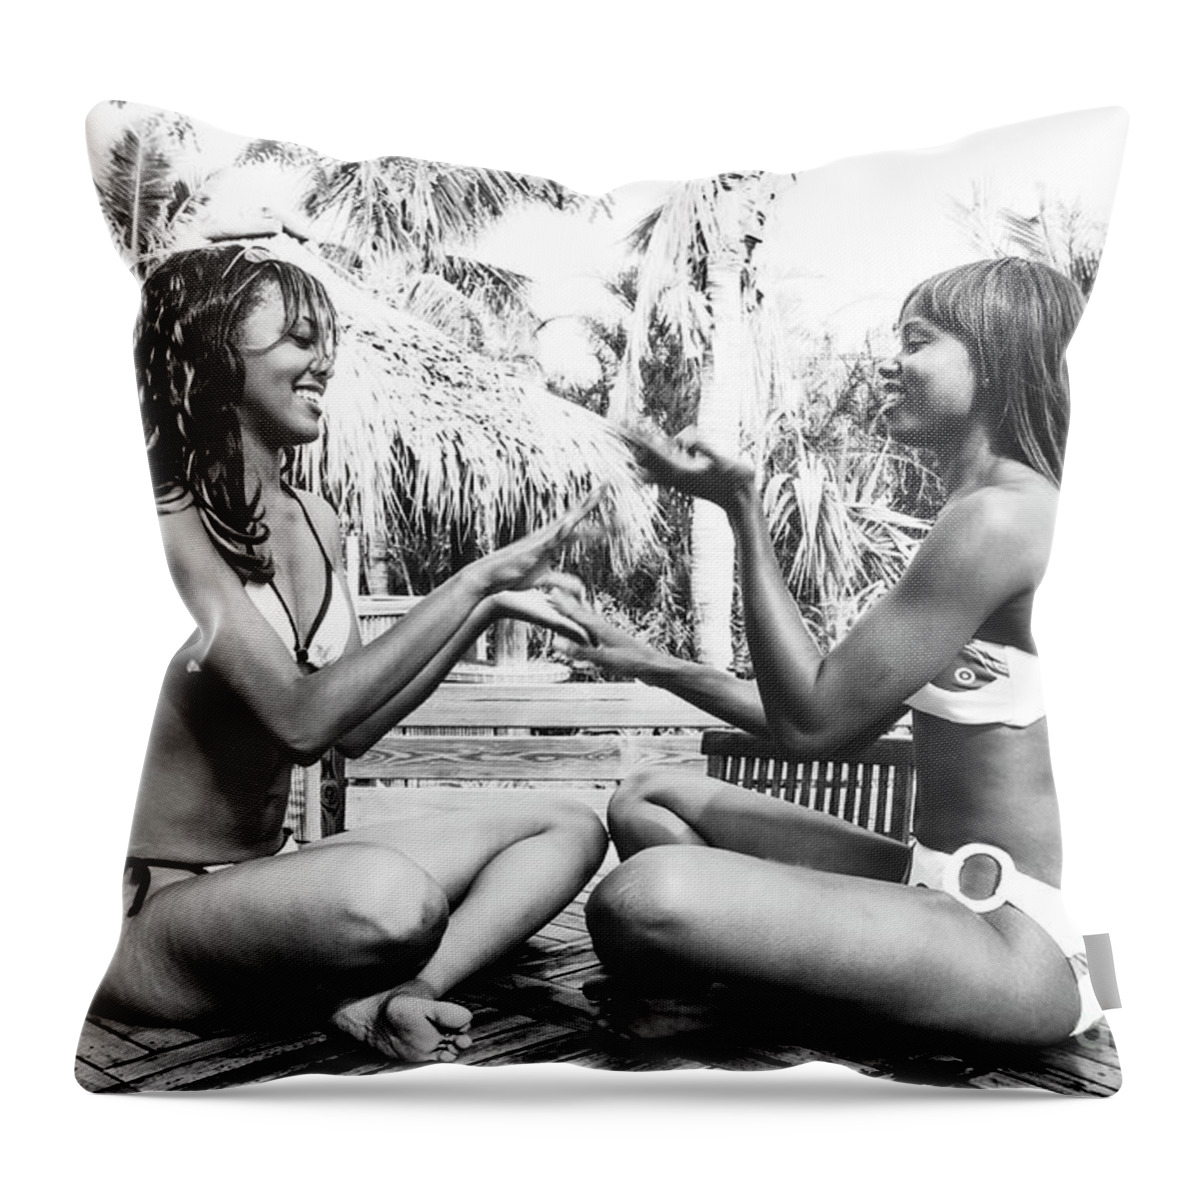 Two Girls Fun Fashion Photography Art Throw Pillow featuring the photograph 0883 Lilisha Dominique Girlfriends Cranes Beach House Delray by Amyn Nasser